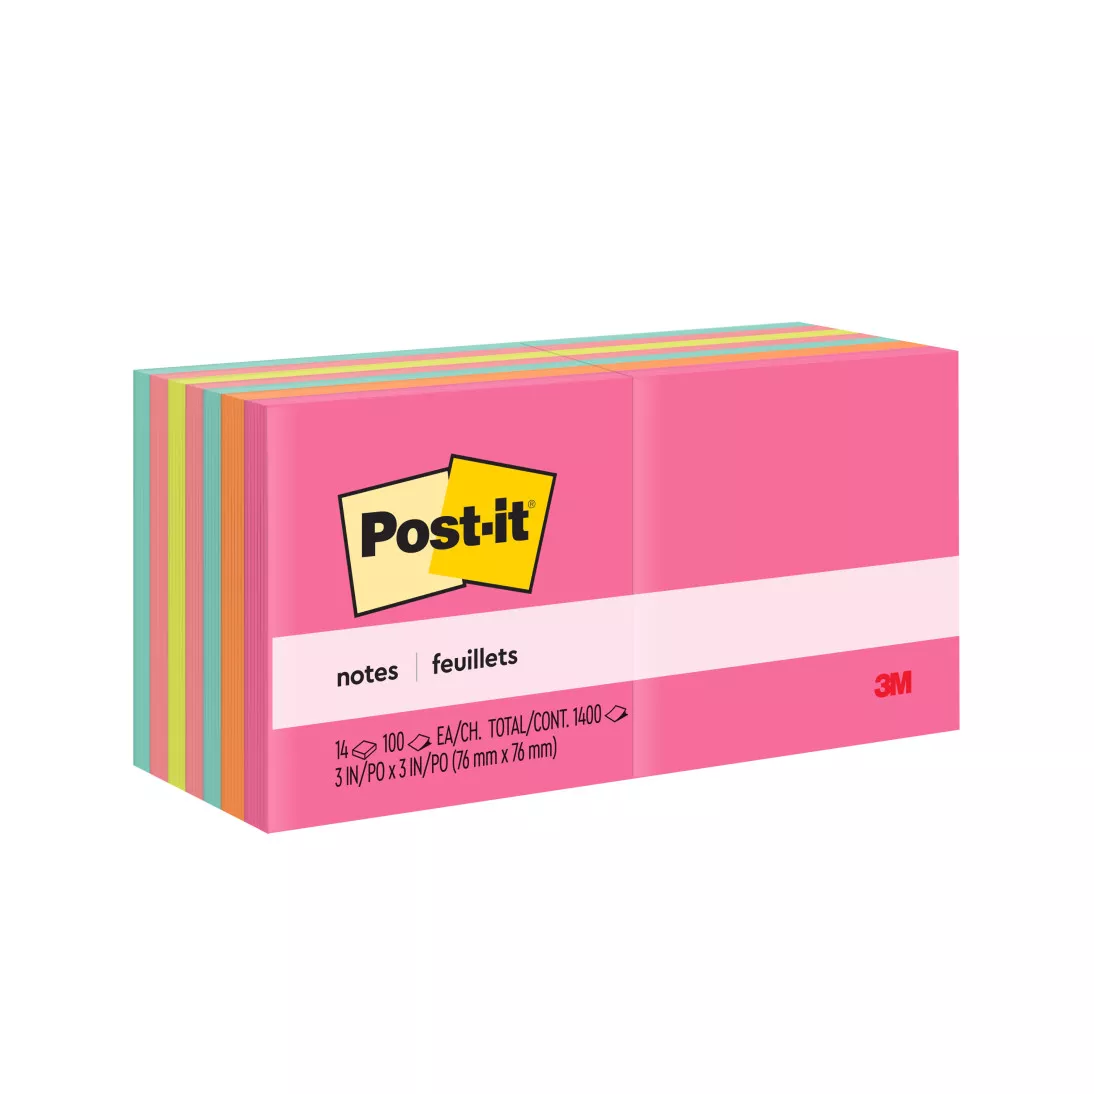 Post-it® Notes 654-14AN, 3 in x 3 in (76 mm x 76 mm) Cape Town
Collection